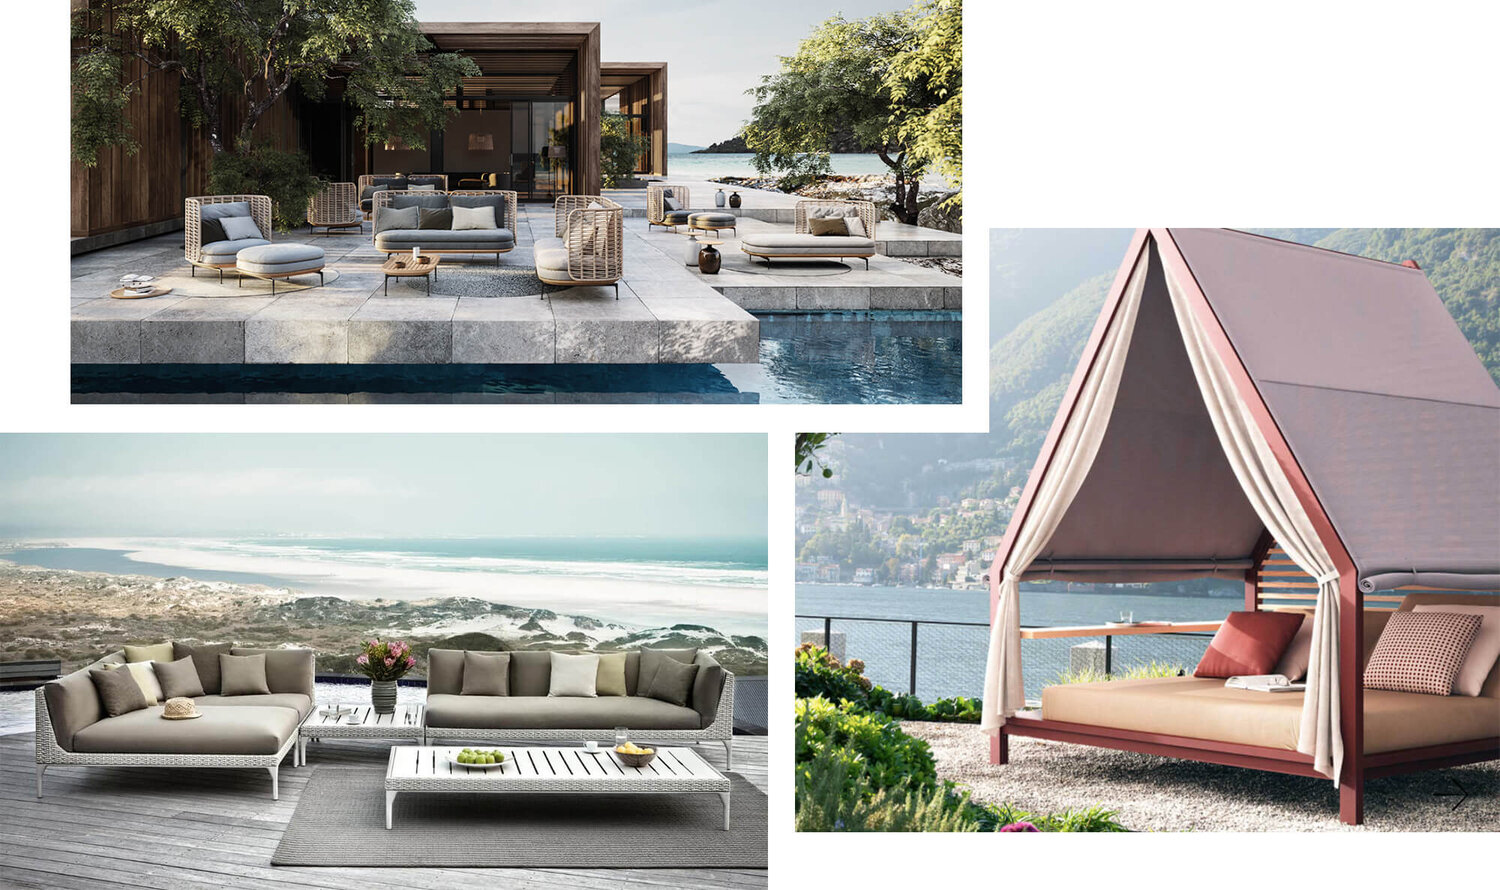 Three exterior views of upscale lounging furniture.